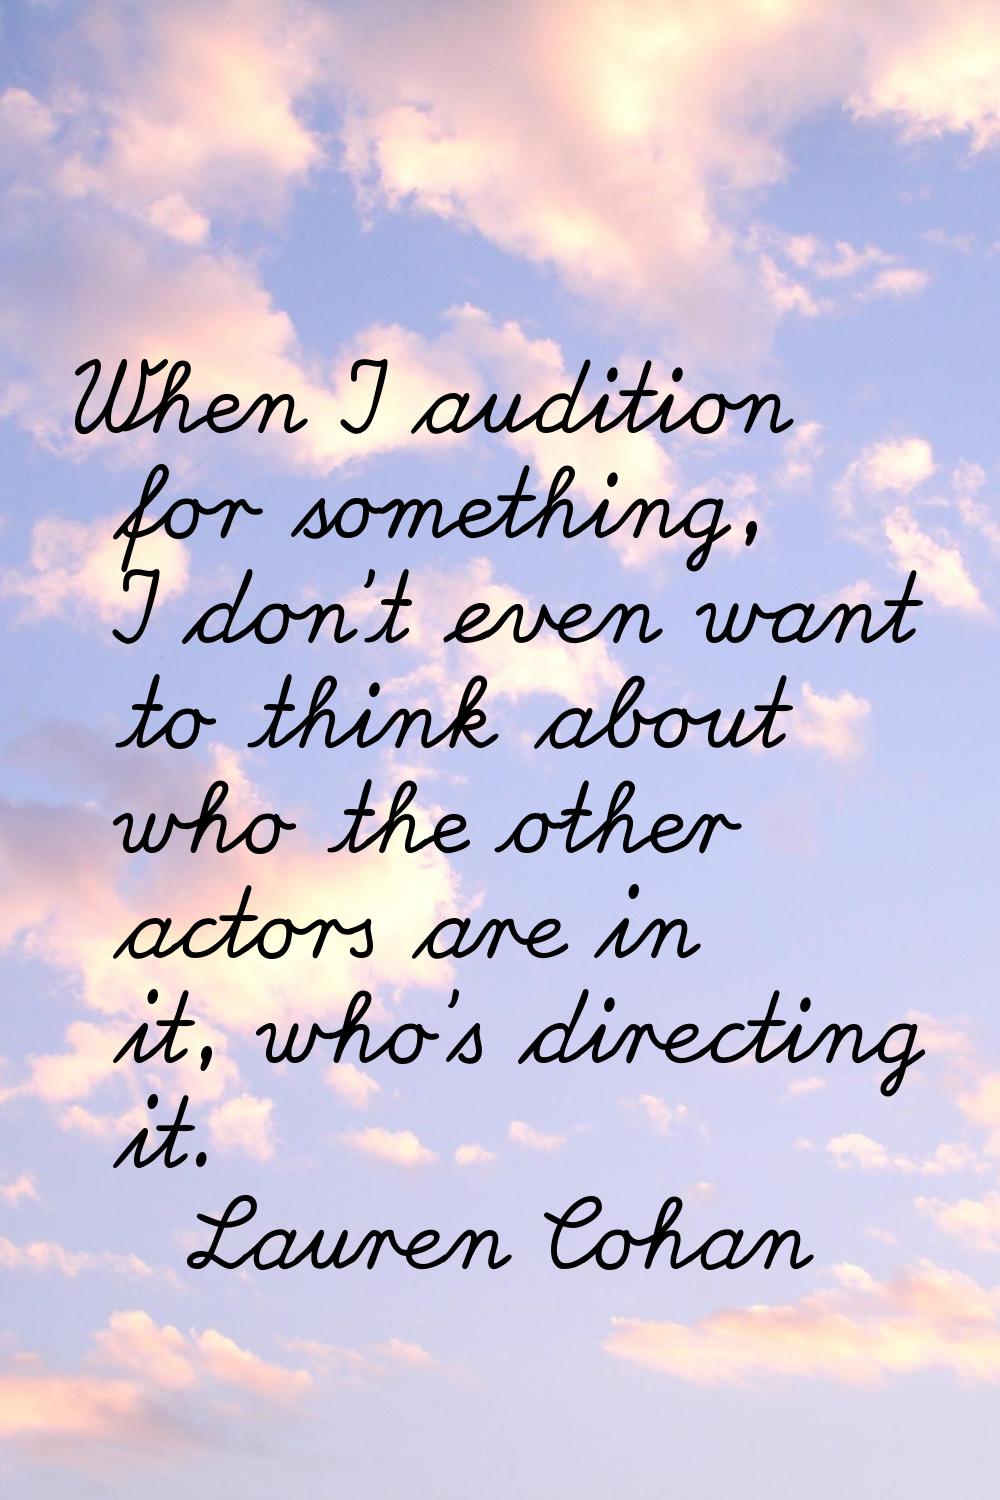 When I audition for something, I don't even want to think about who the other actors are in it, who